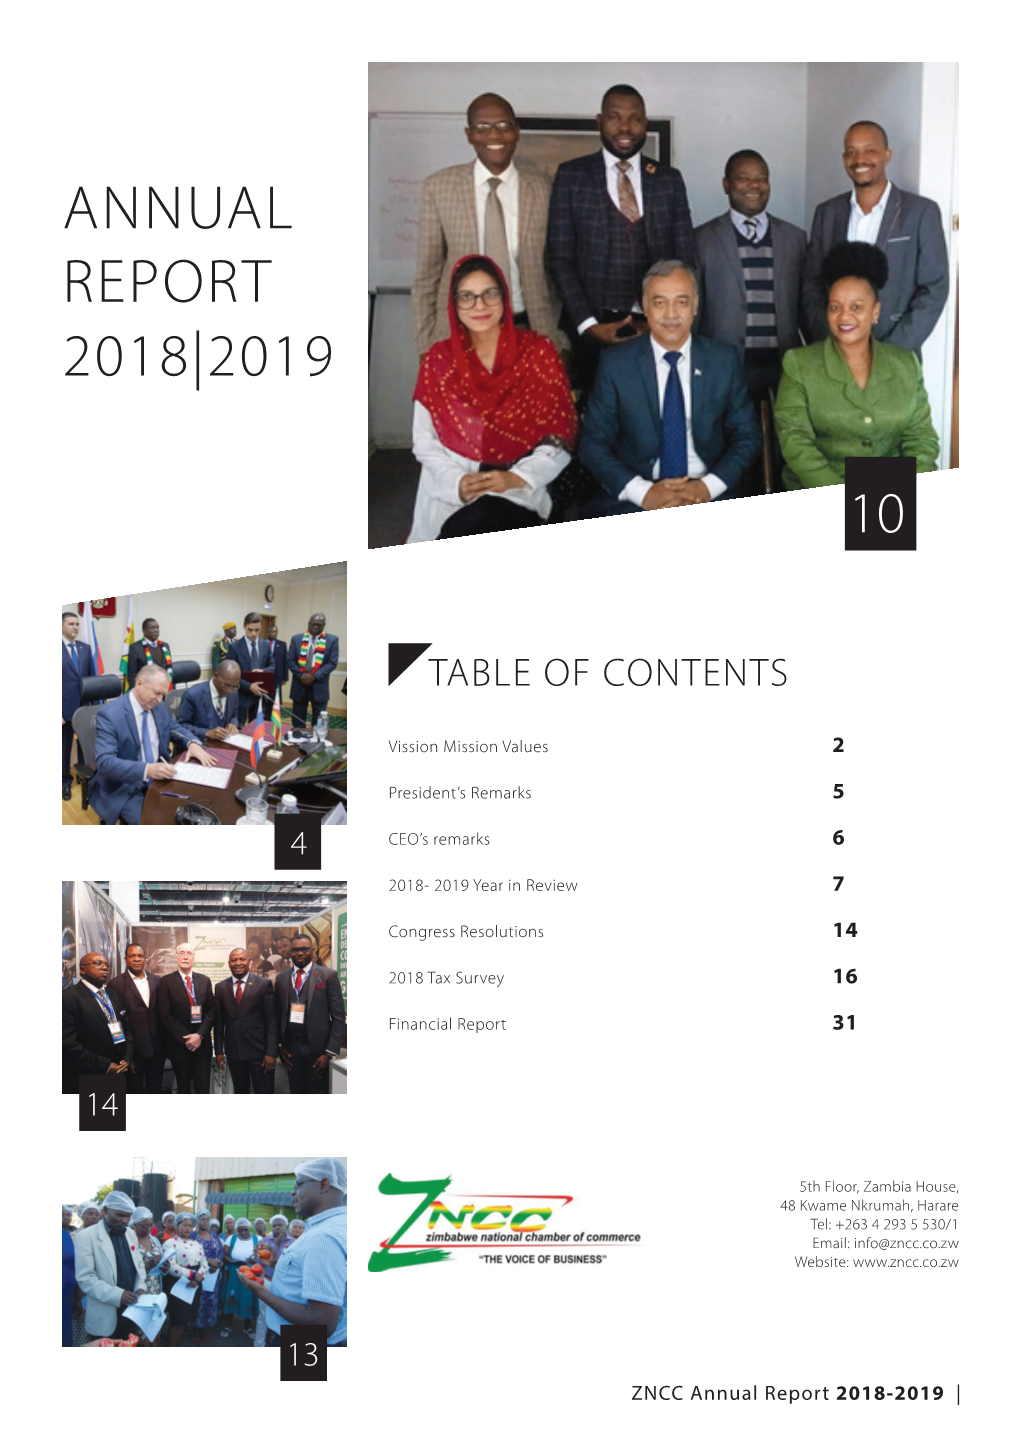 ZNCC ANNUAL REPORT 2018 2019.Indd